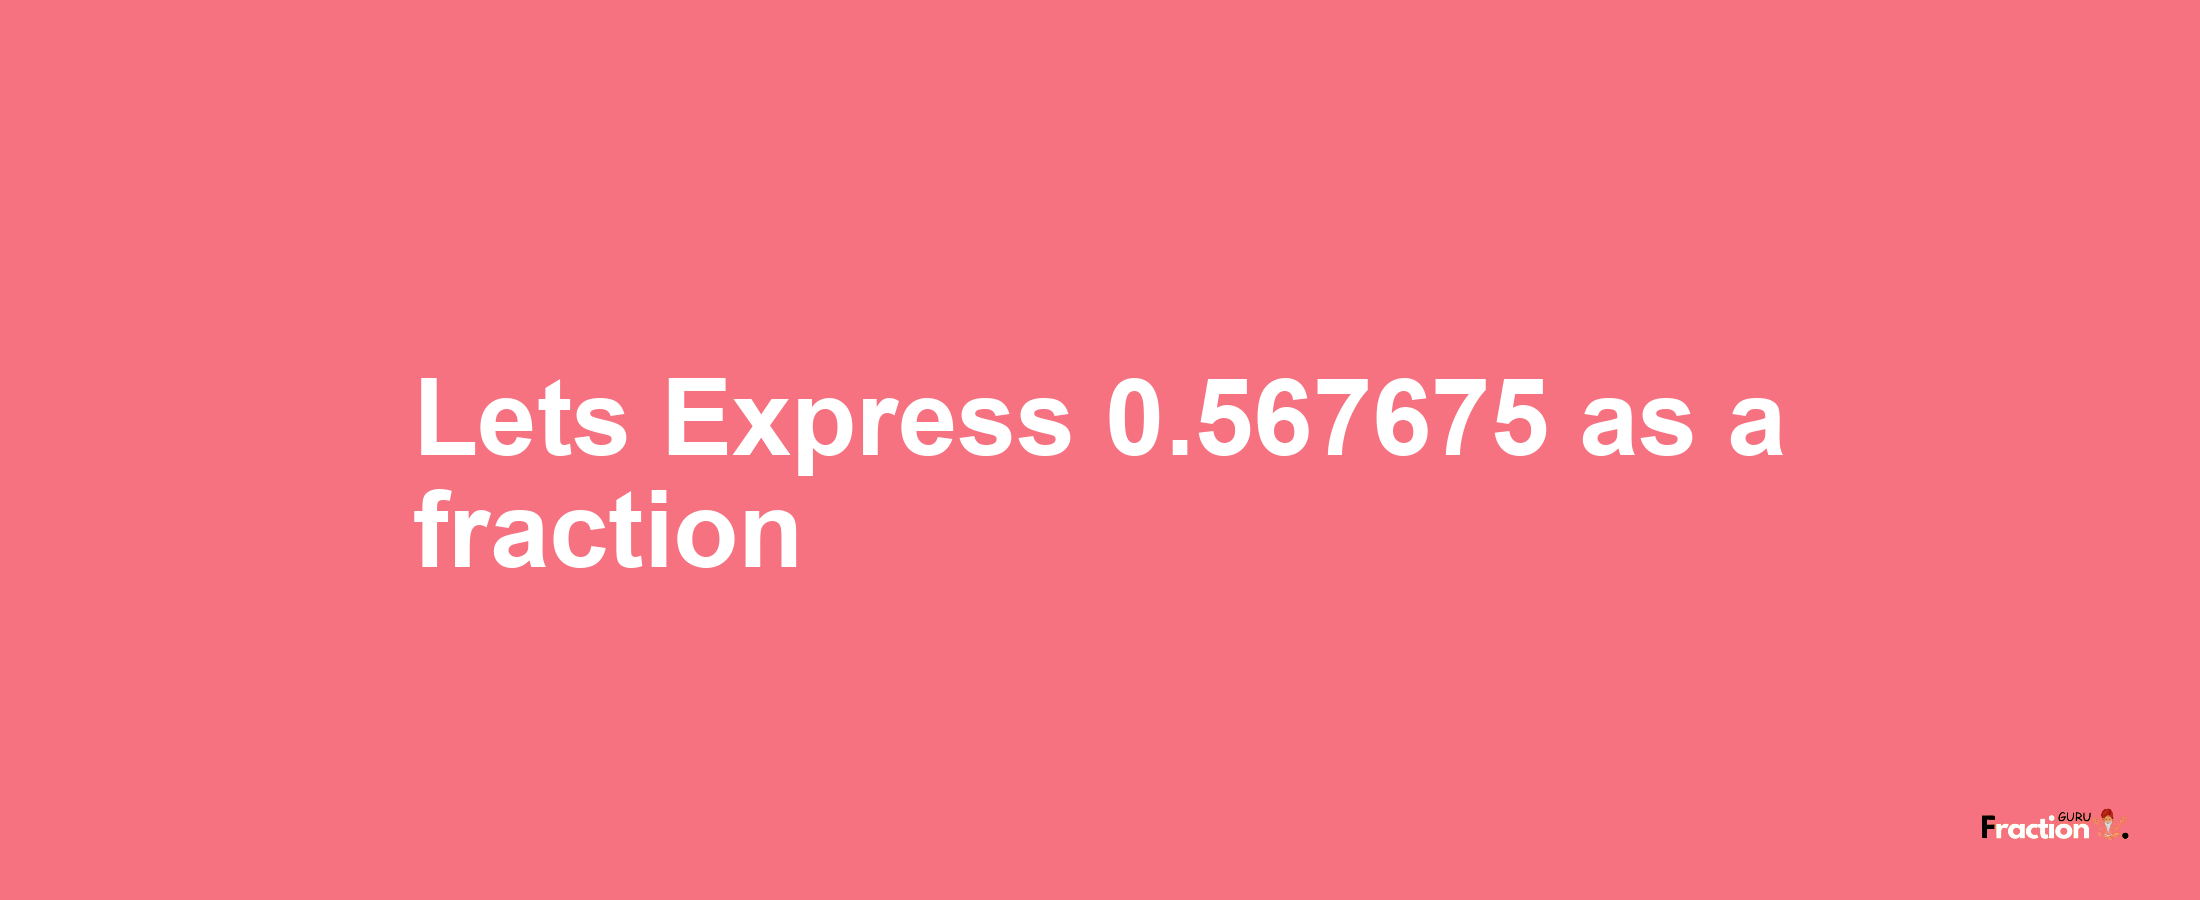 Lets Express 0.567675 as afraction